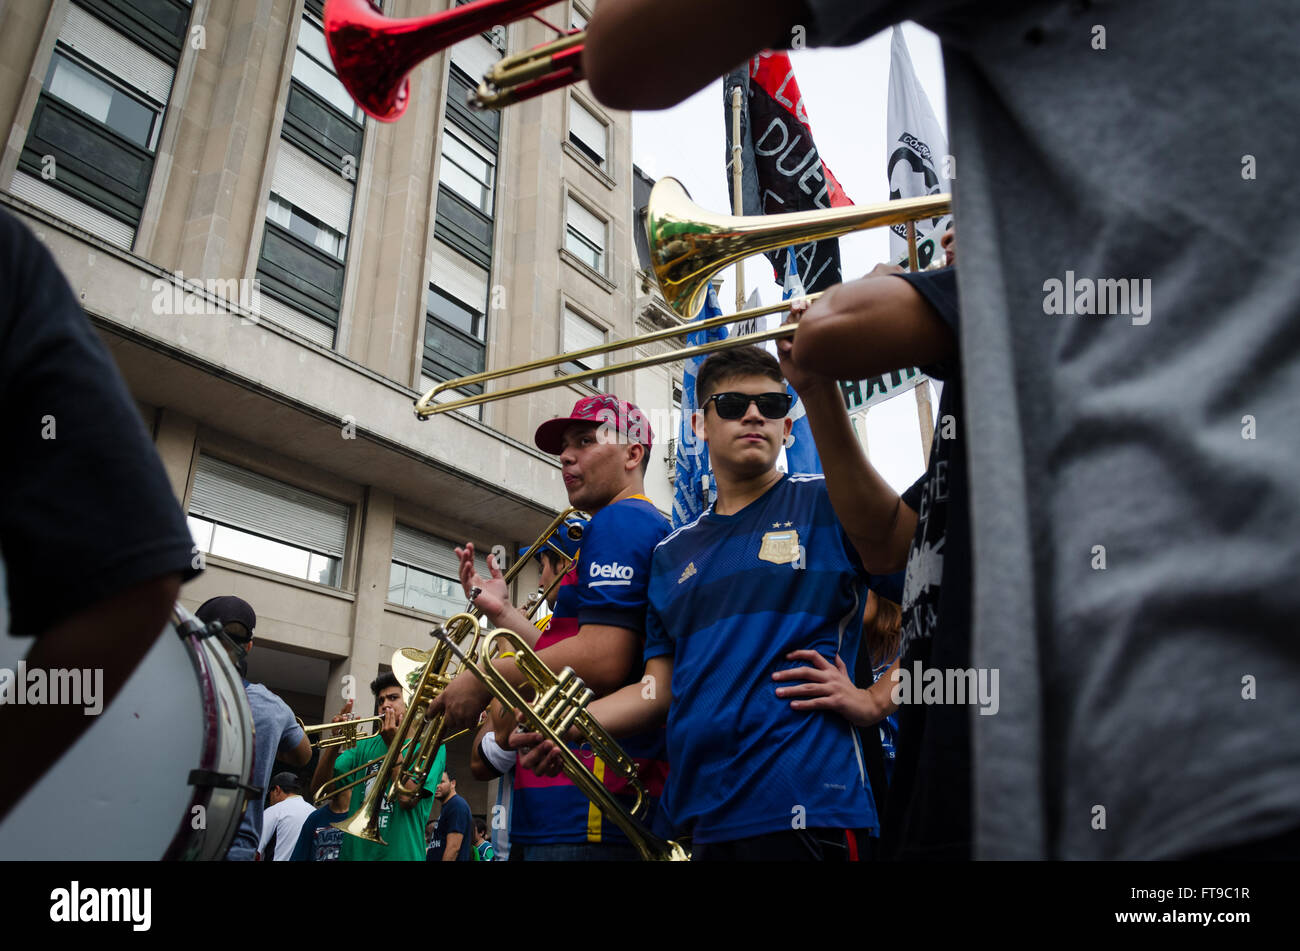 40th anniversary of military coup in Argentina -  24/03/2016  -  Argentina / Buenos Aires  -  Young peronists militants play clarinets and trumpets in march memory to 40 years into the military dictatorship.   -  Matias Izaguirre / Le Pictorium Stock Photo